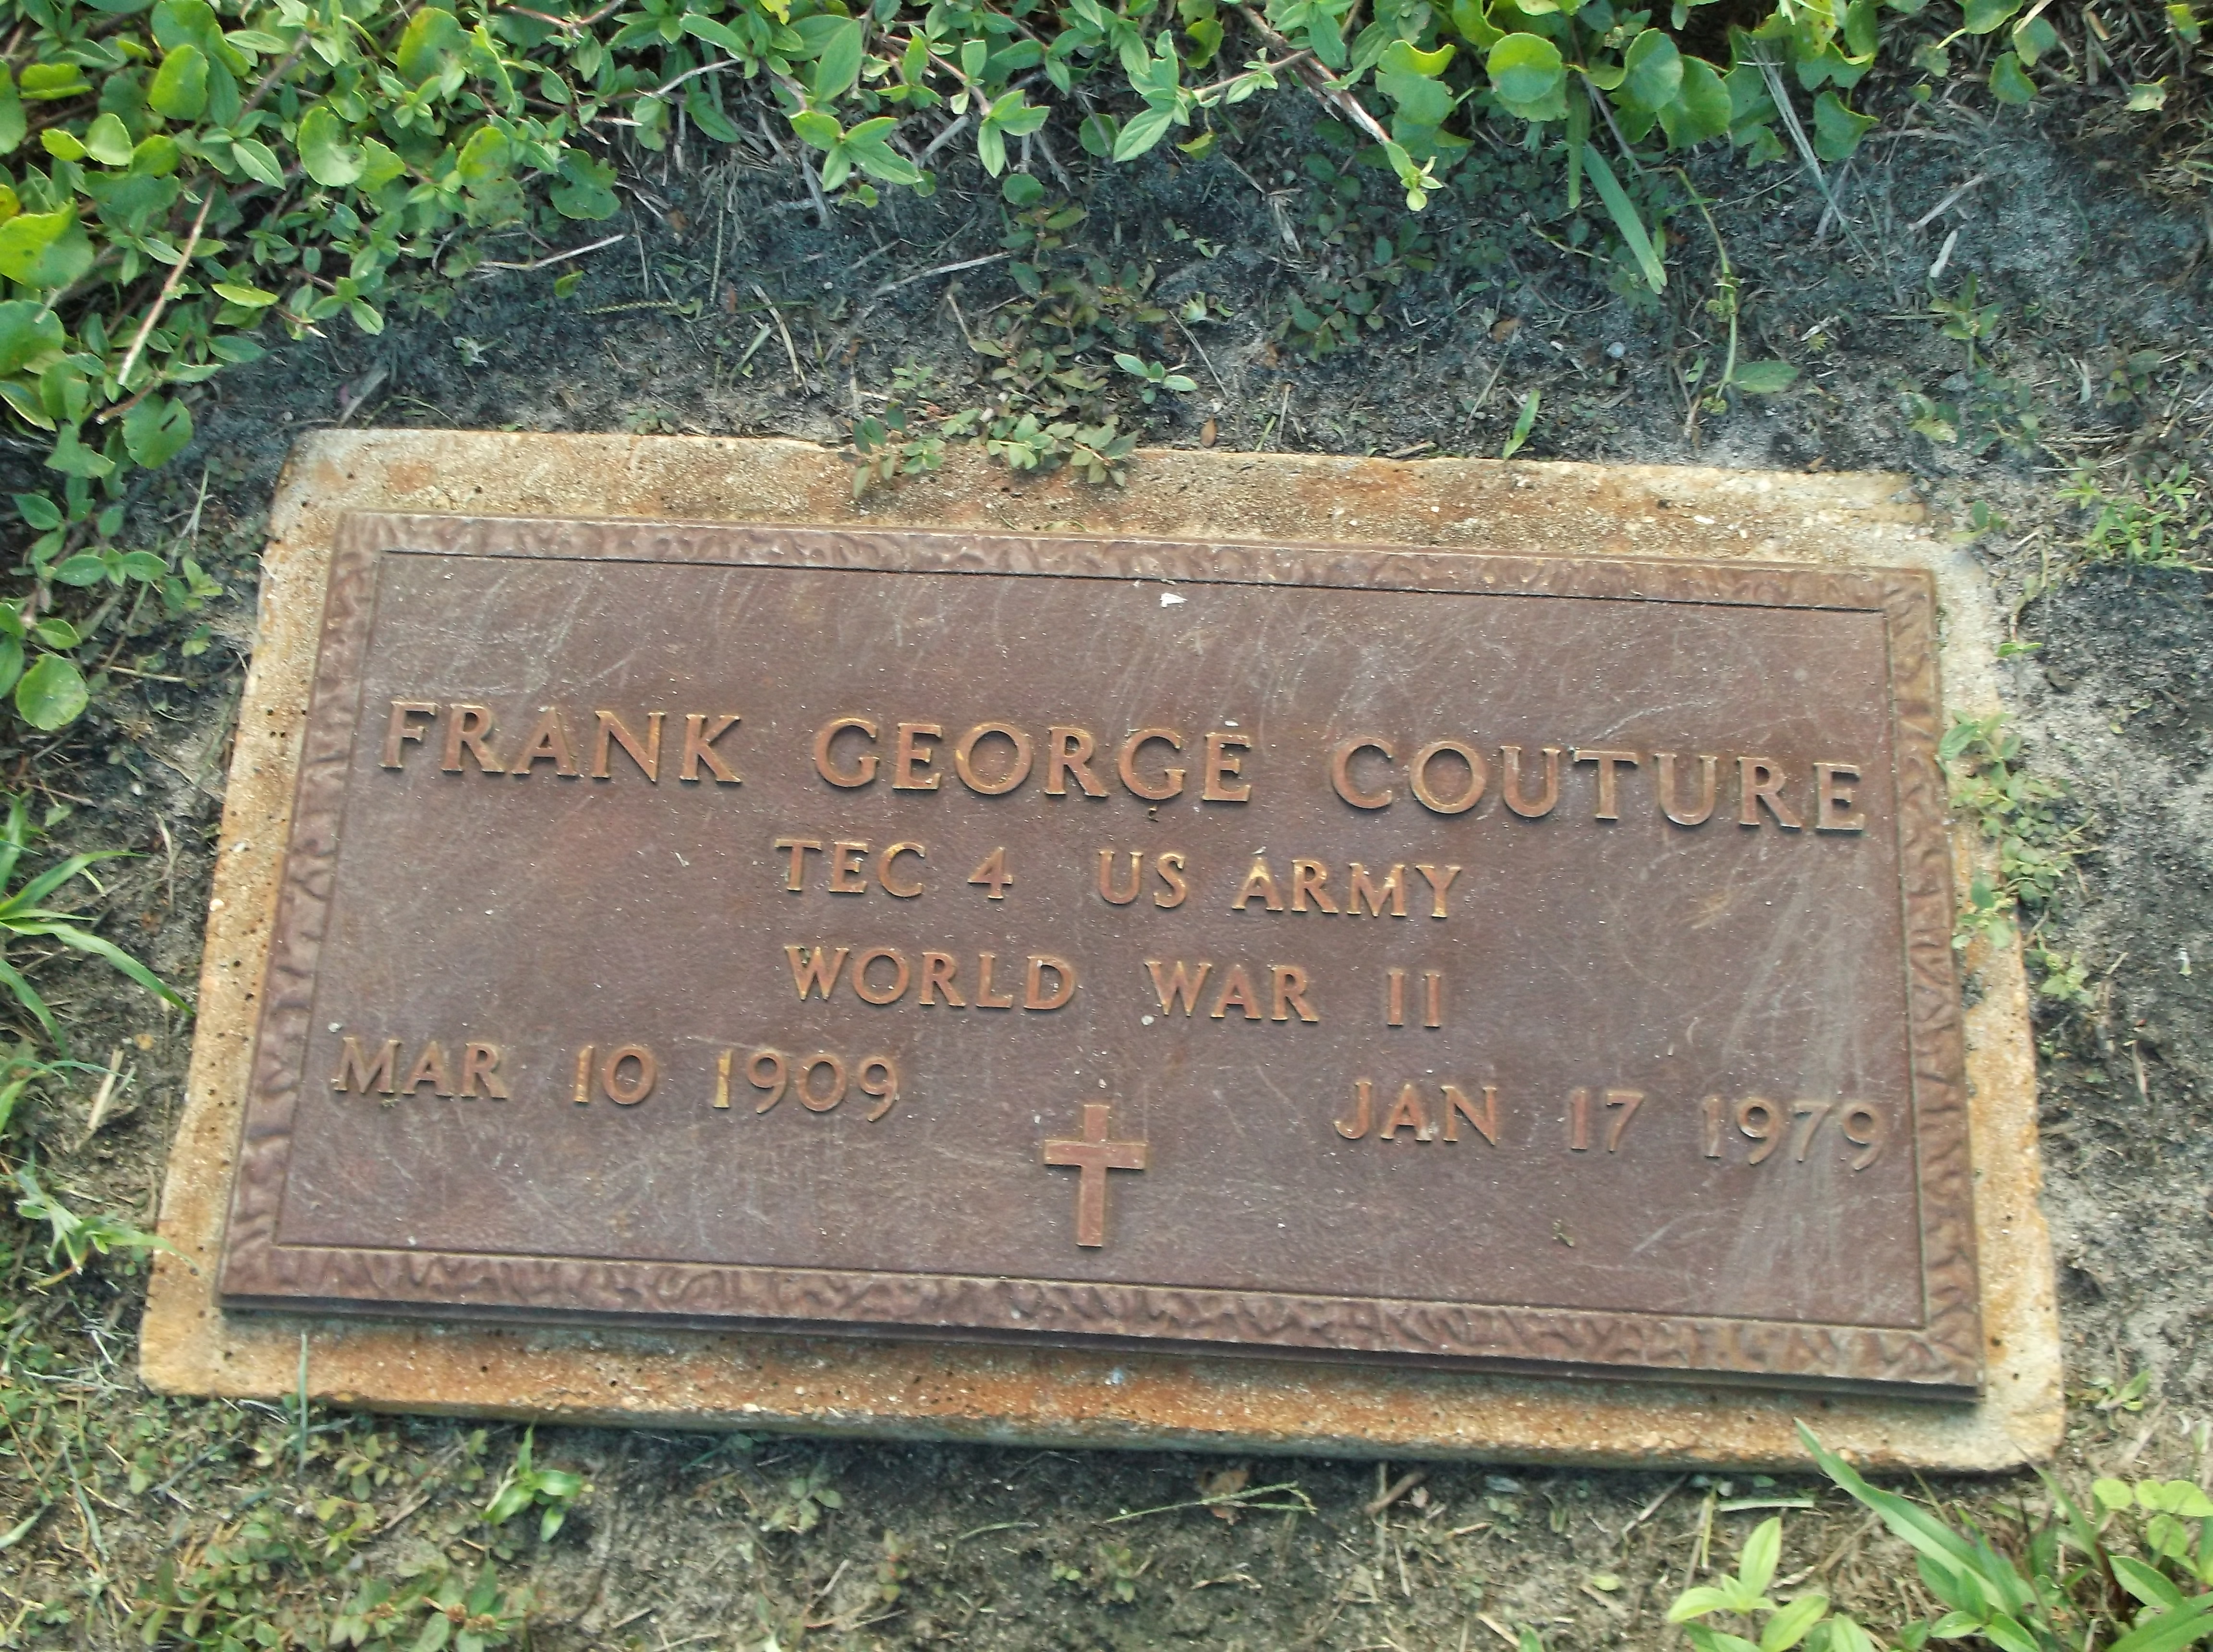 Frank George Couture